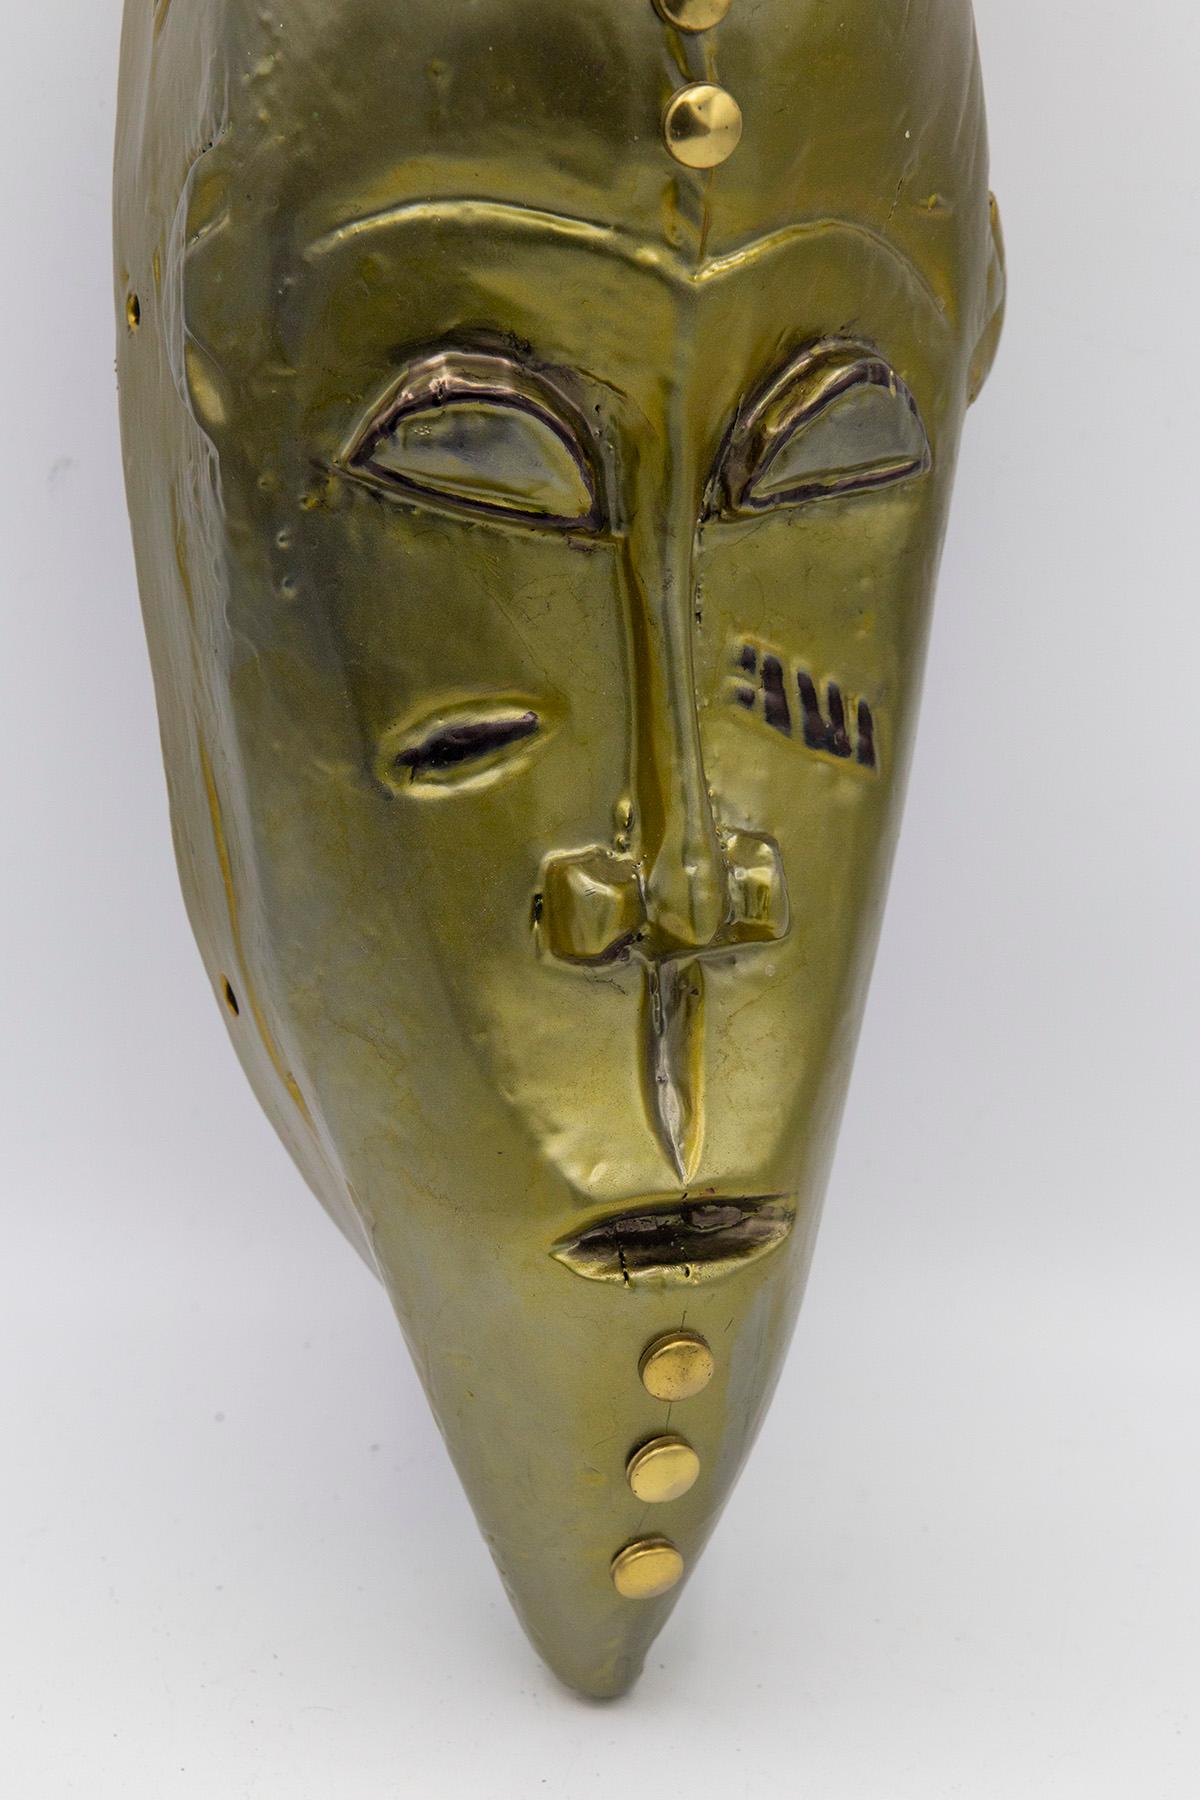 Single African mask created by artist Bomber Bax.
The mask dates back to the early 1900s and was subsequently processed and painted in late 2022 by the artist.
The artist used special metallic paints to evoke a lunar effect and draw attention to a